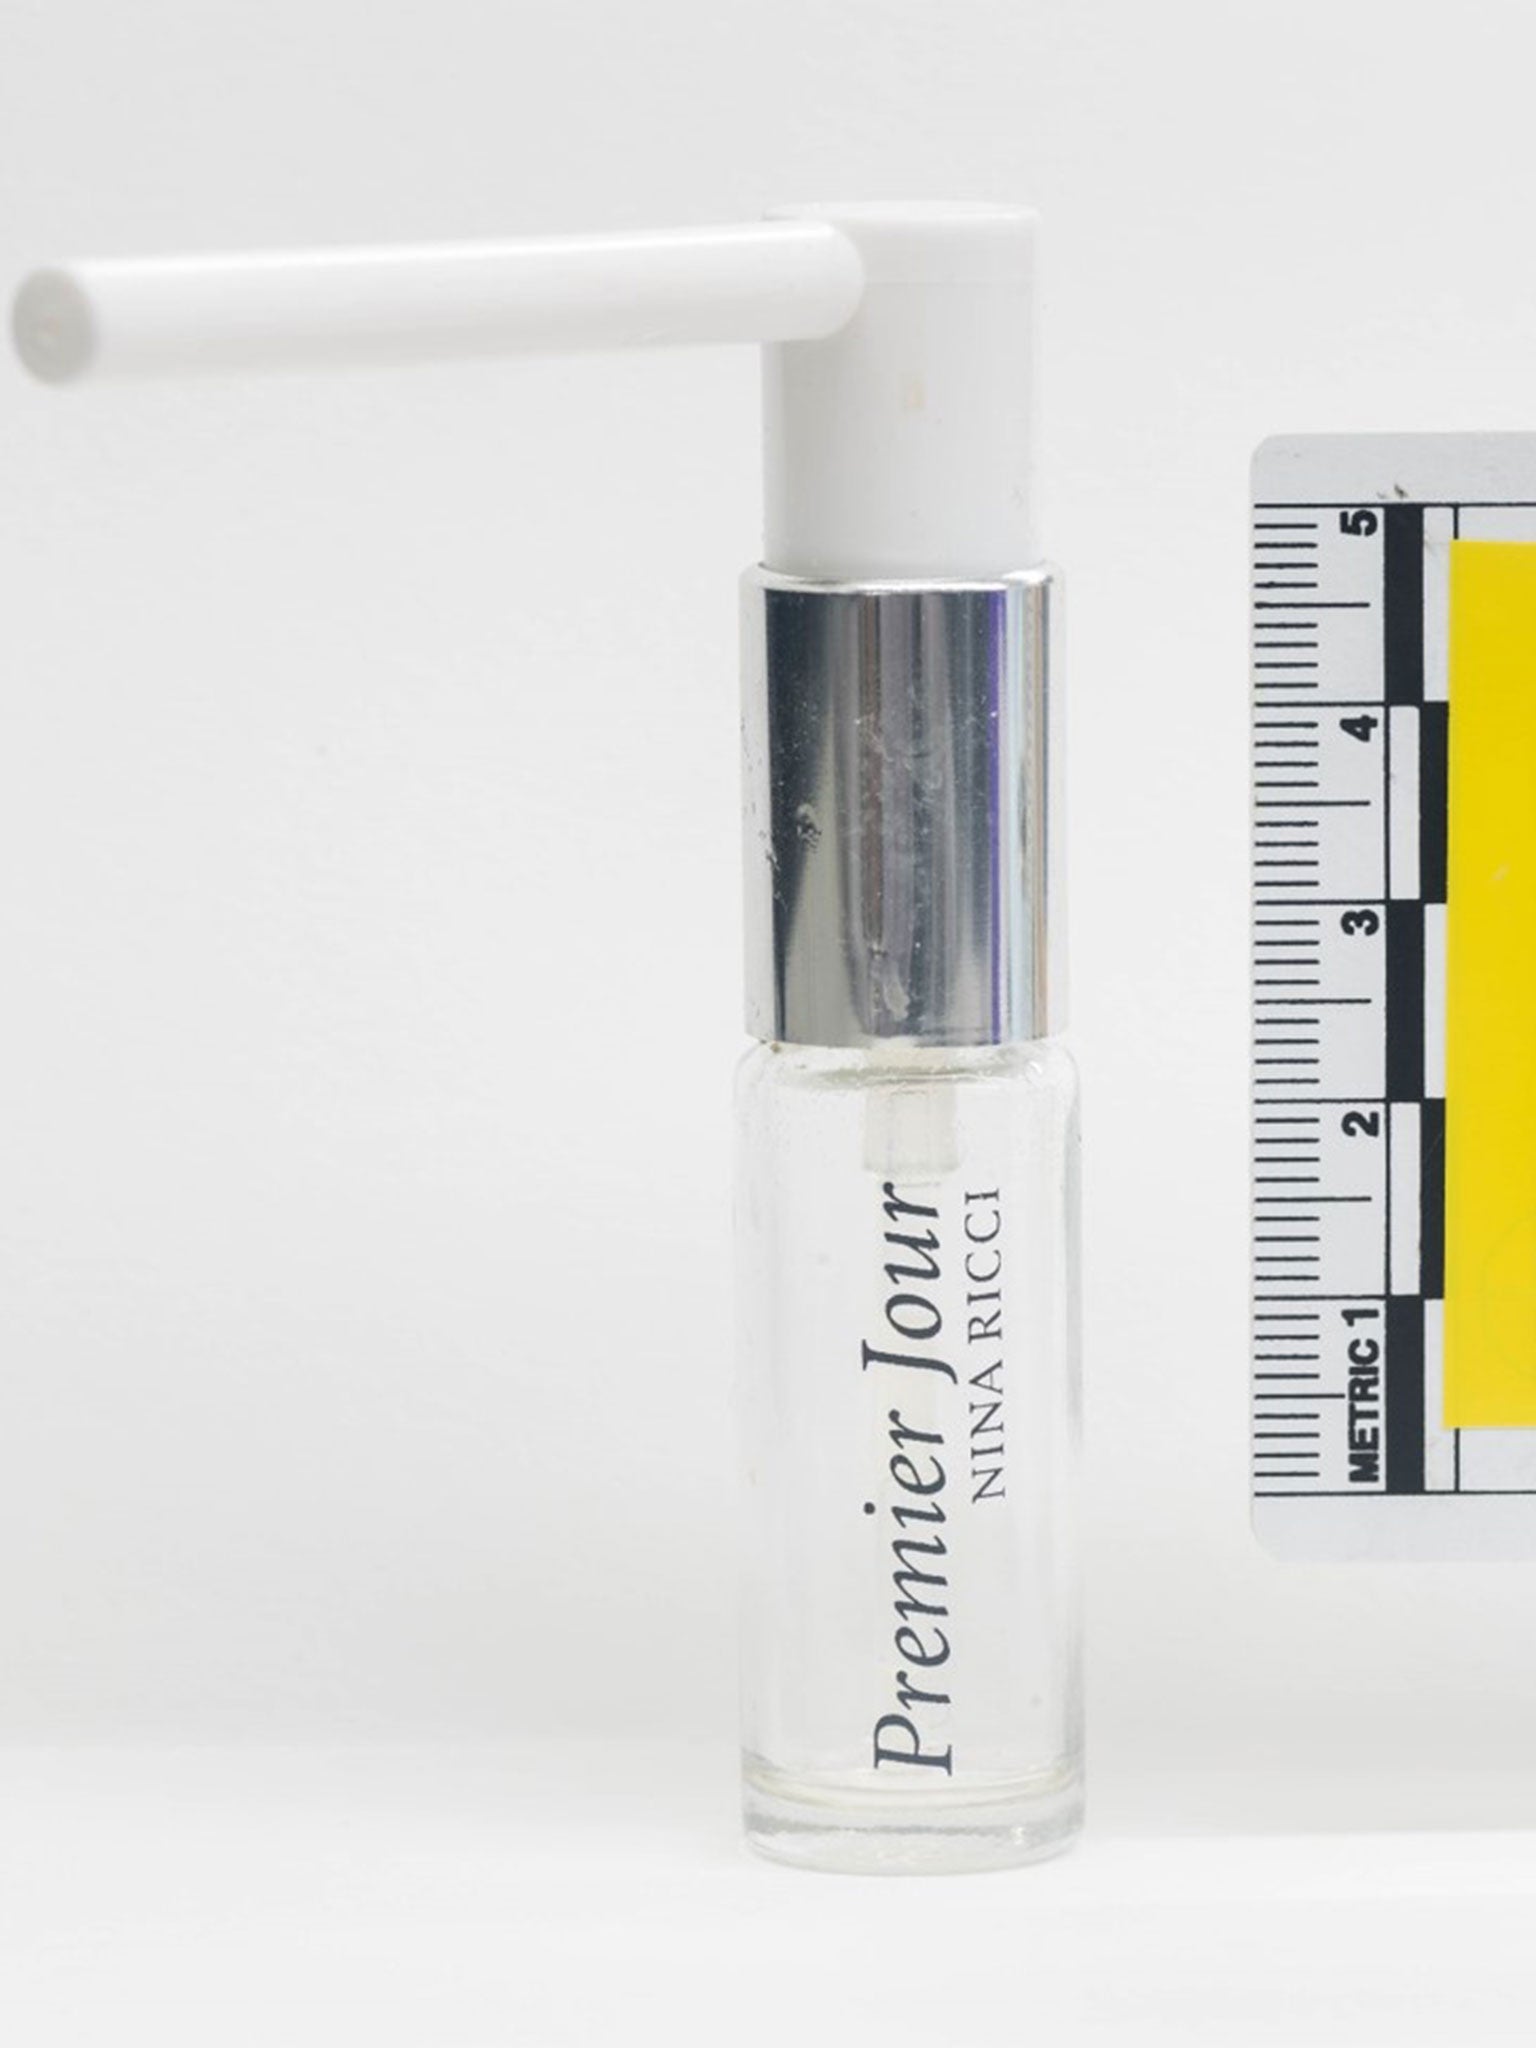 The counterfeit and specially adapted perfume bottle that contained novichok and poisoned Dawn Sturgess and Charlie Rowley